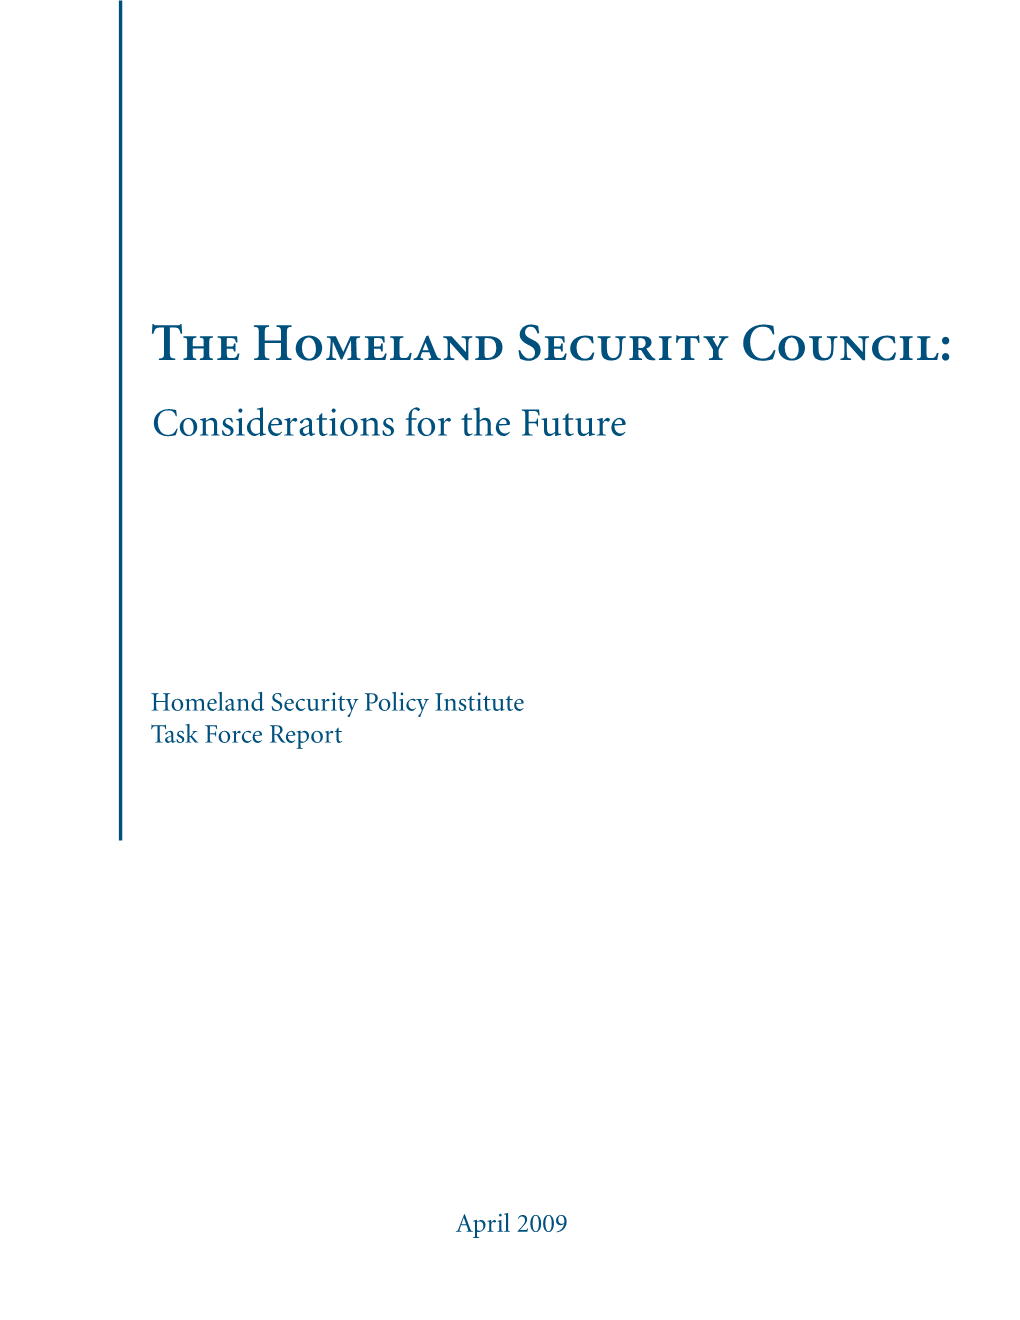 The Homeland Security Council: Considerations for the Future